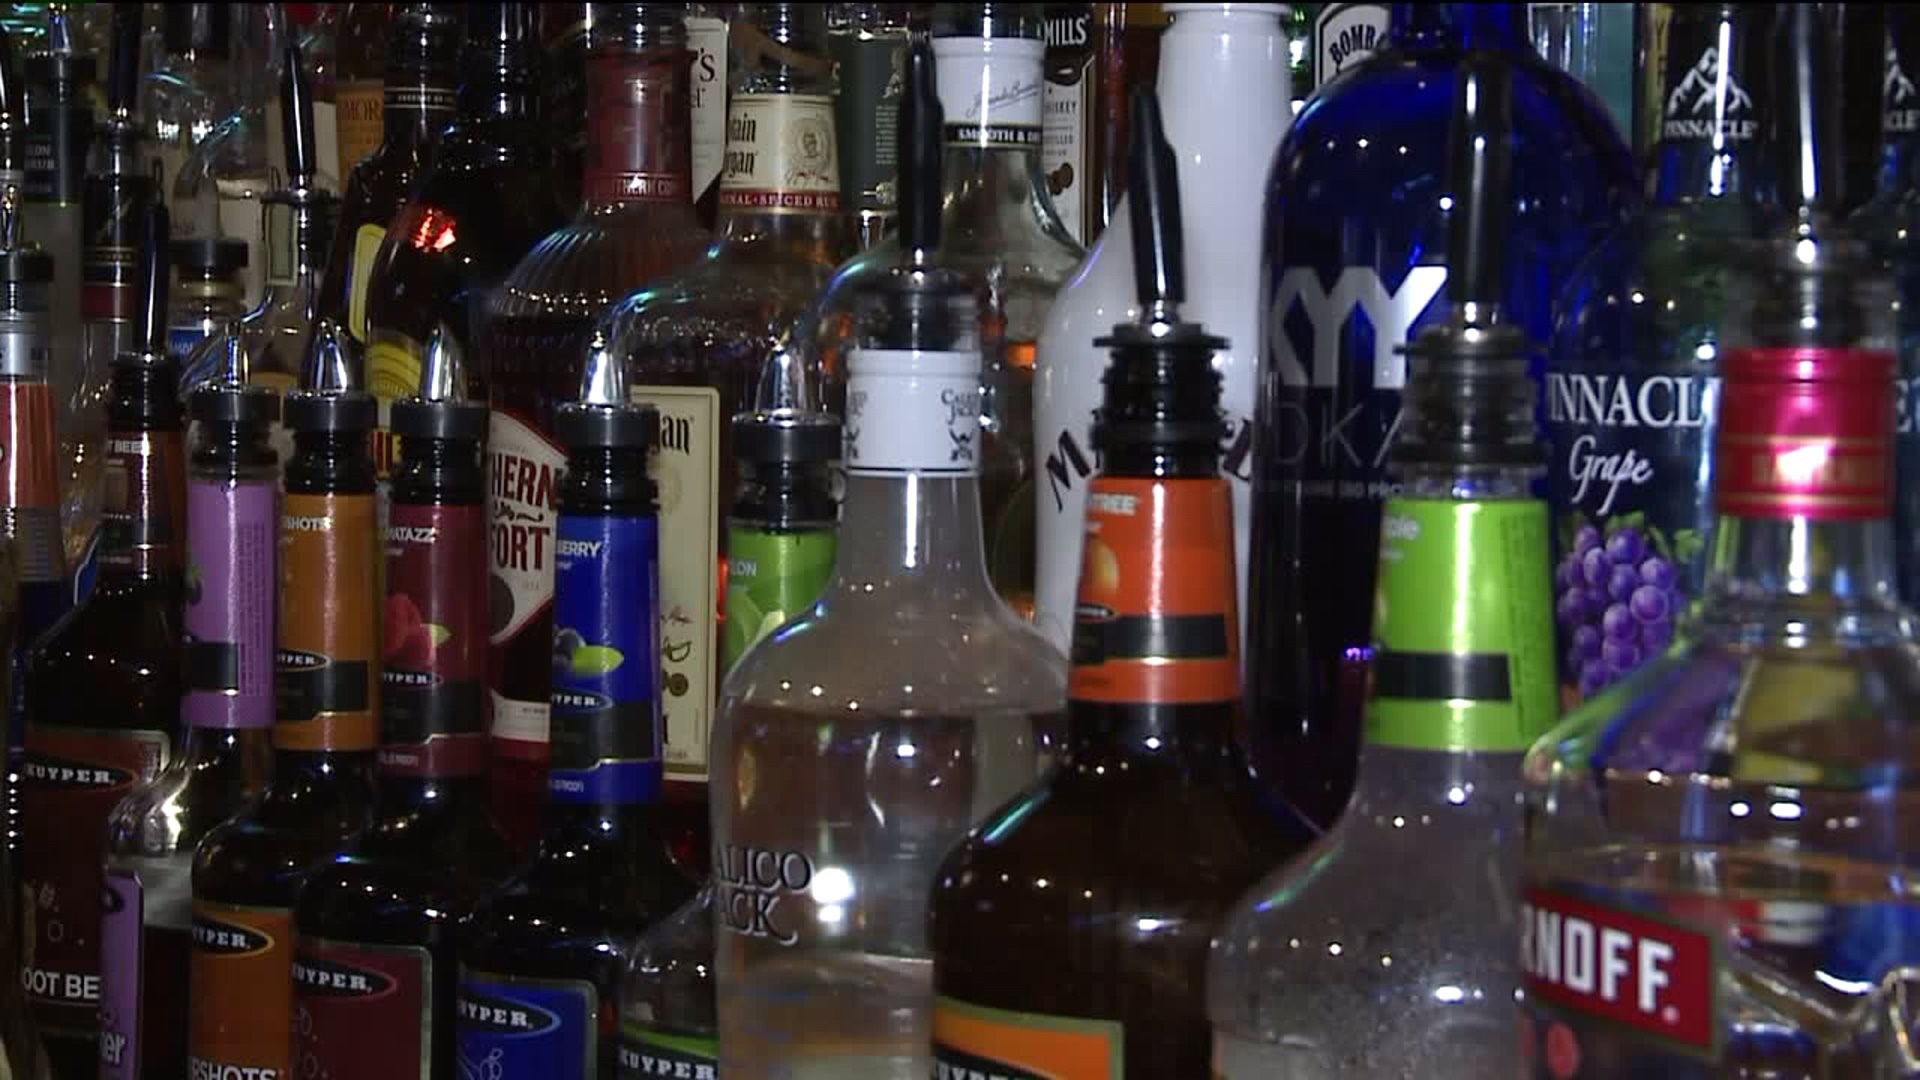 Clinton County No. 1 in State For Excessive Drinking